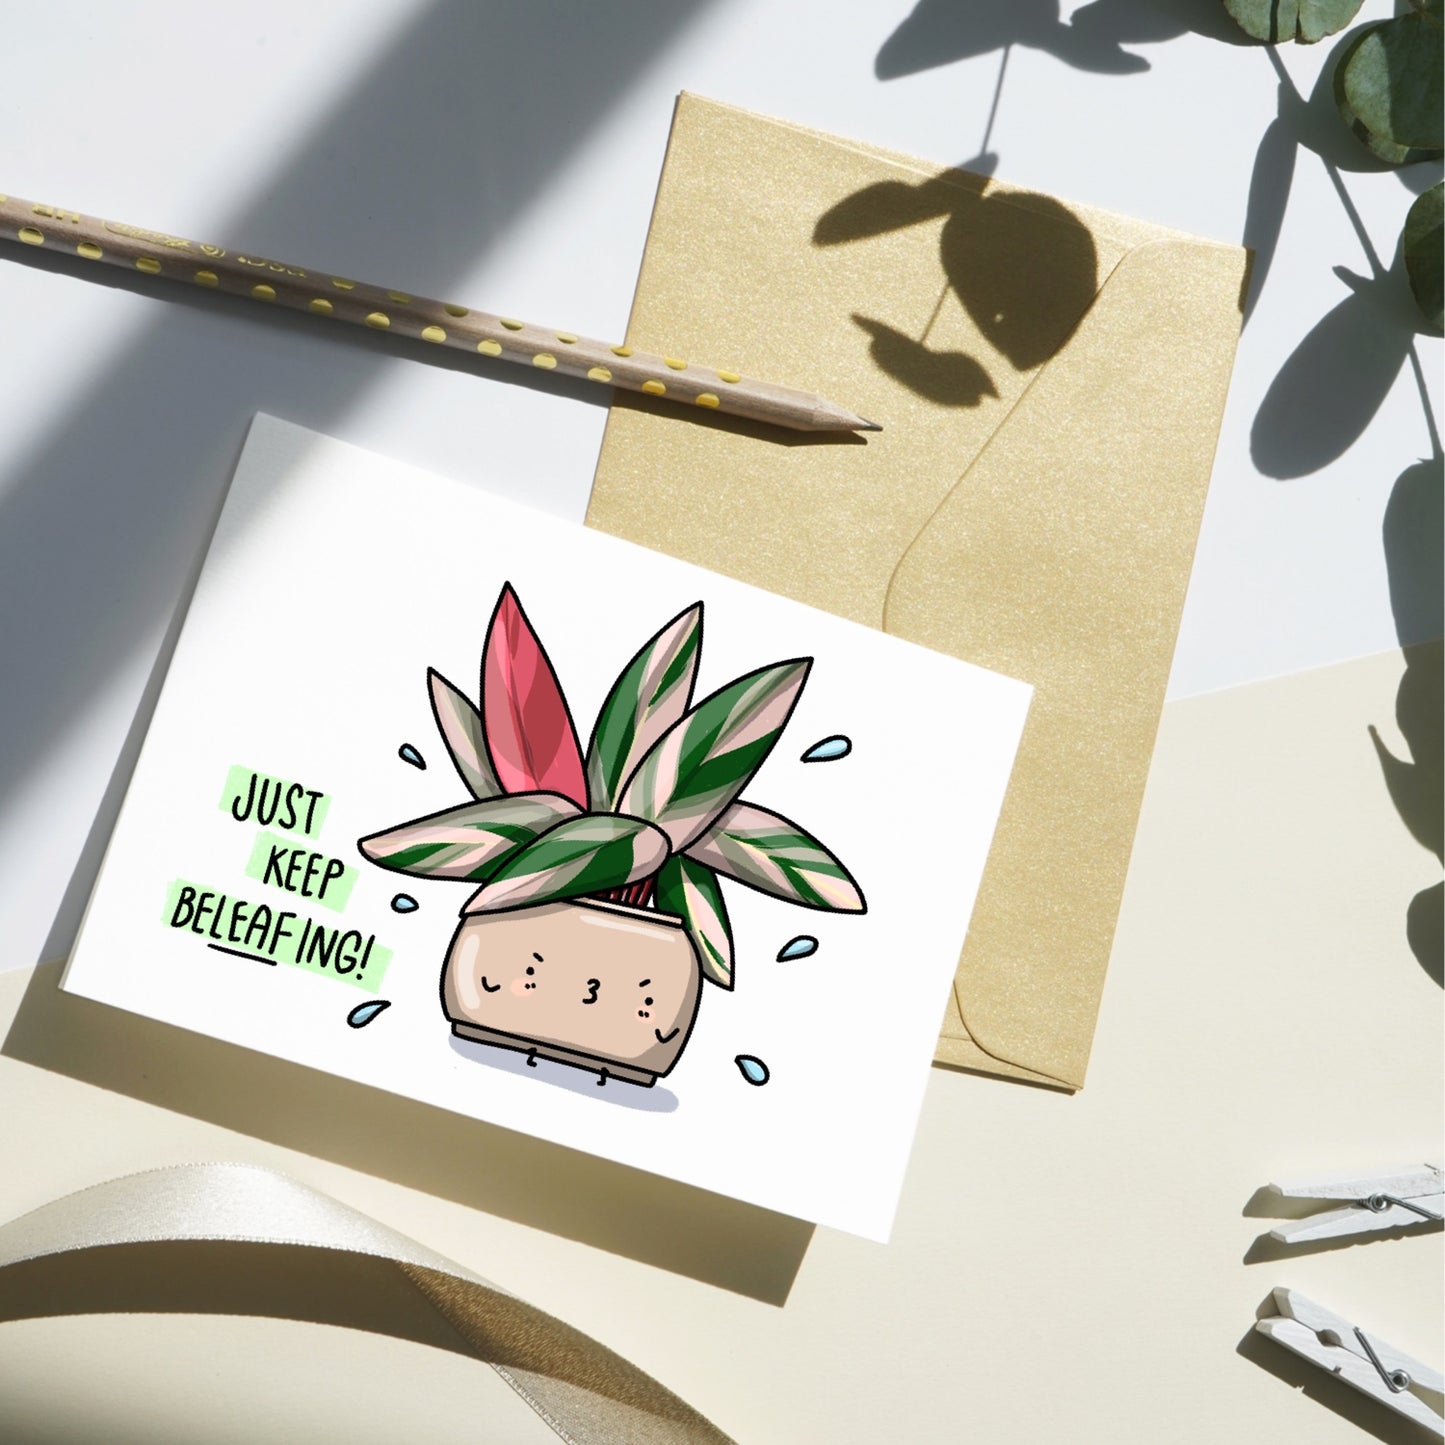 Just Keep BeLEAFing, Plant Greeting Card